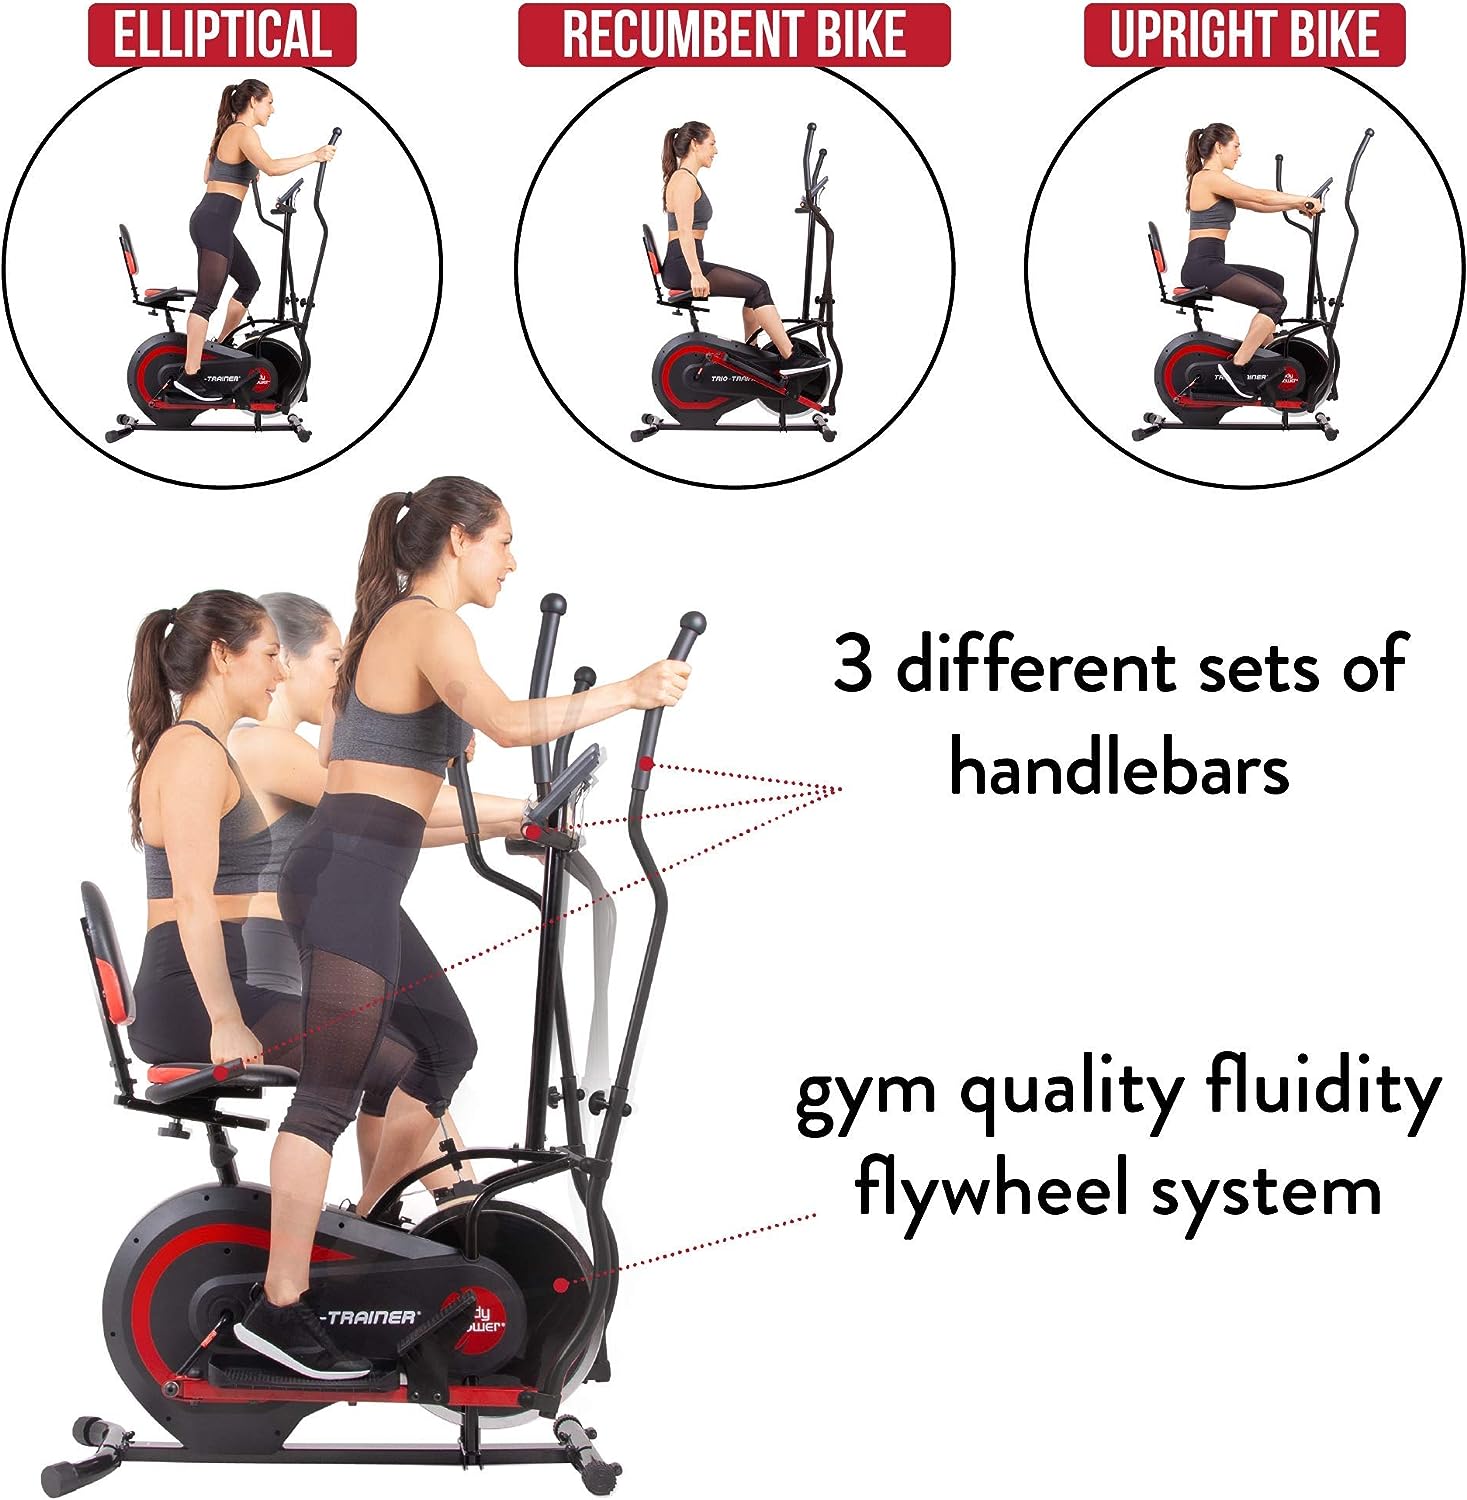 [BODY POWER] - 2nd Gen, PATENTED 3 in 1 Exercise Machine, Elliptical with Seat Back Cushion, Upright Cycling, and Reclined Bike Modes - Digital Computer Targets Different Body Parts, BRT5118